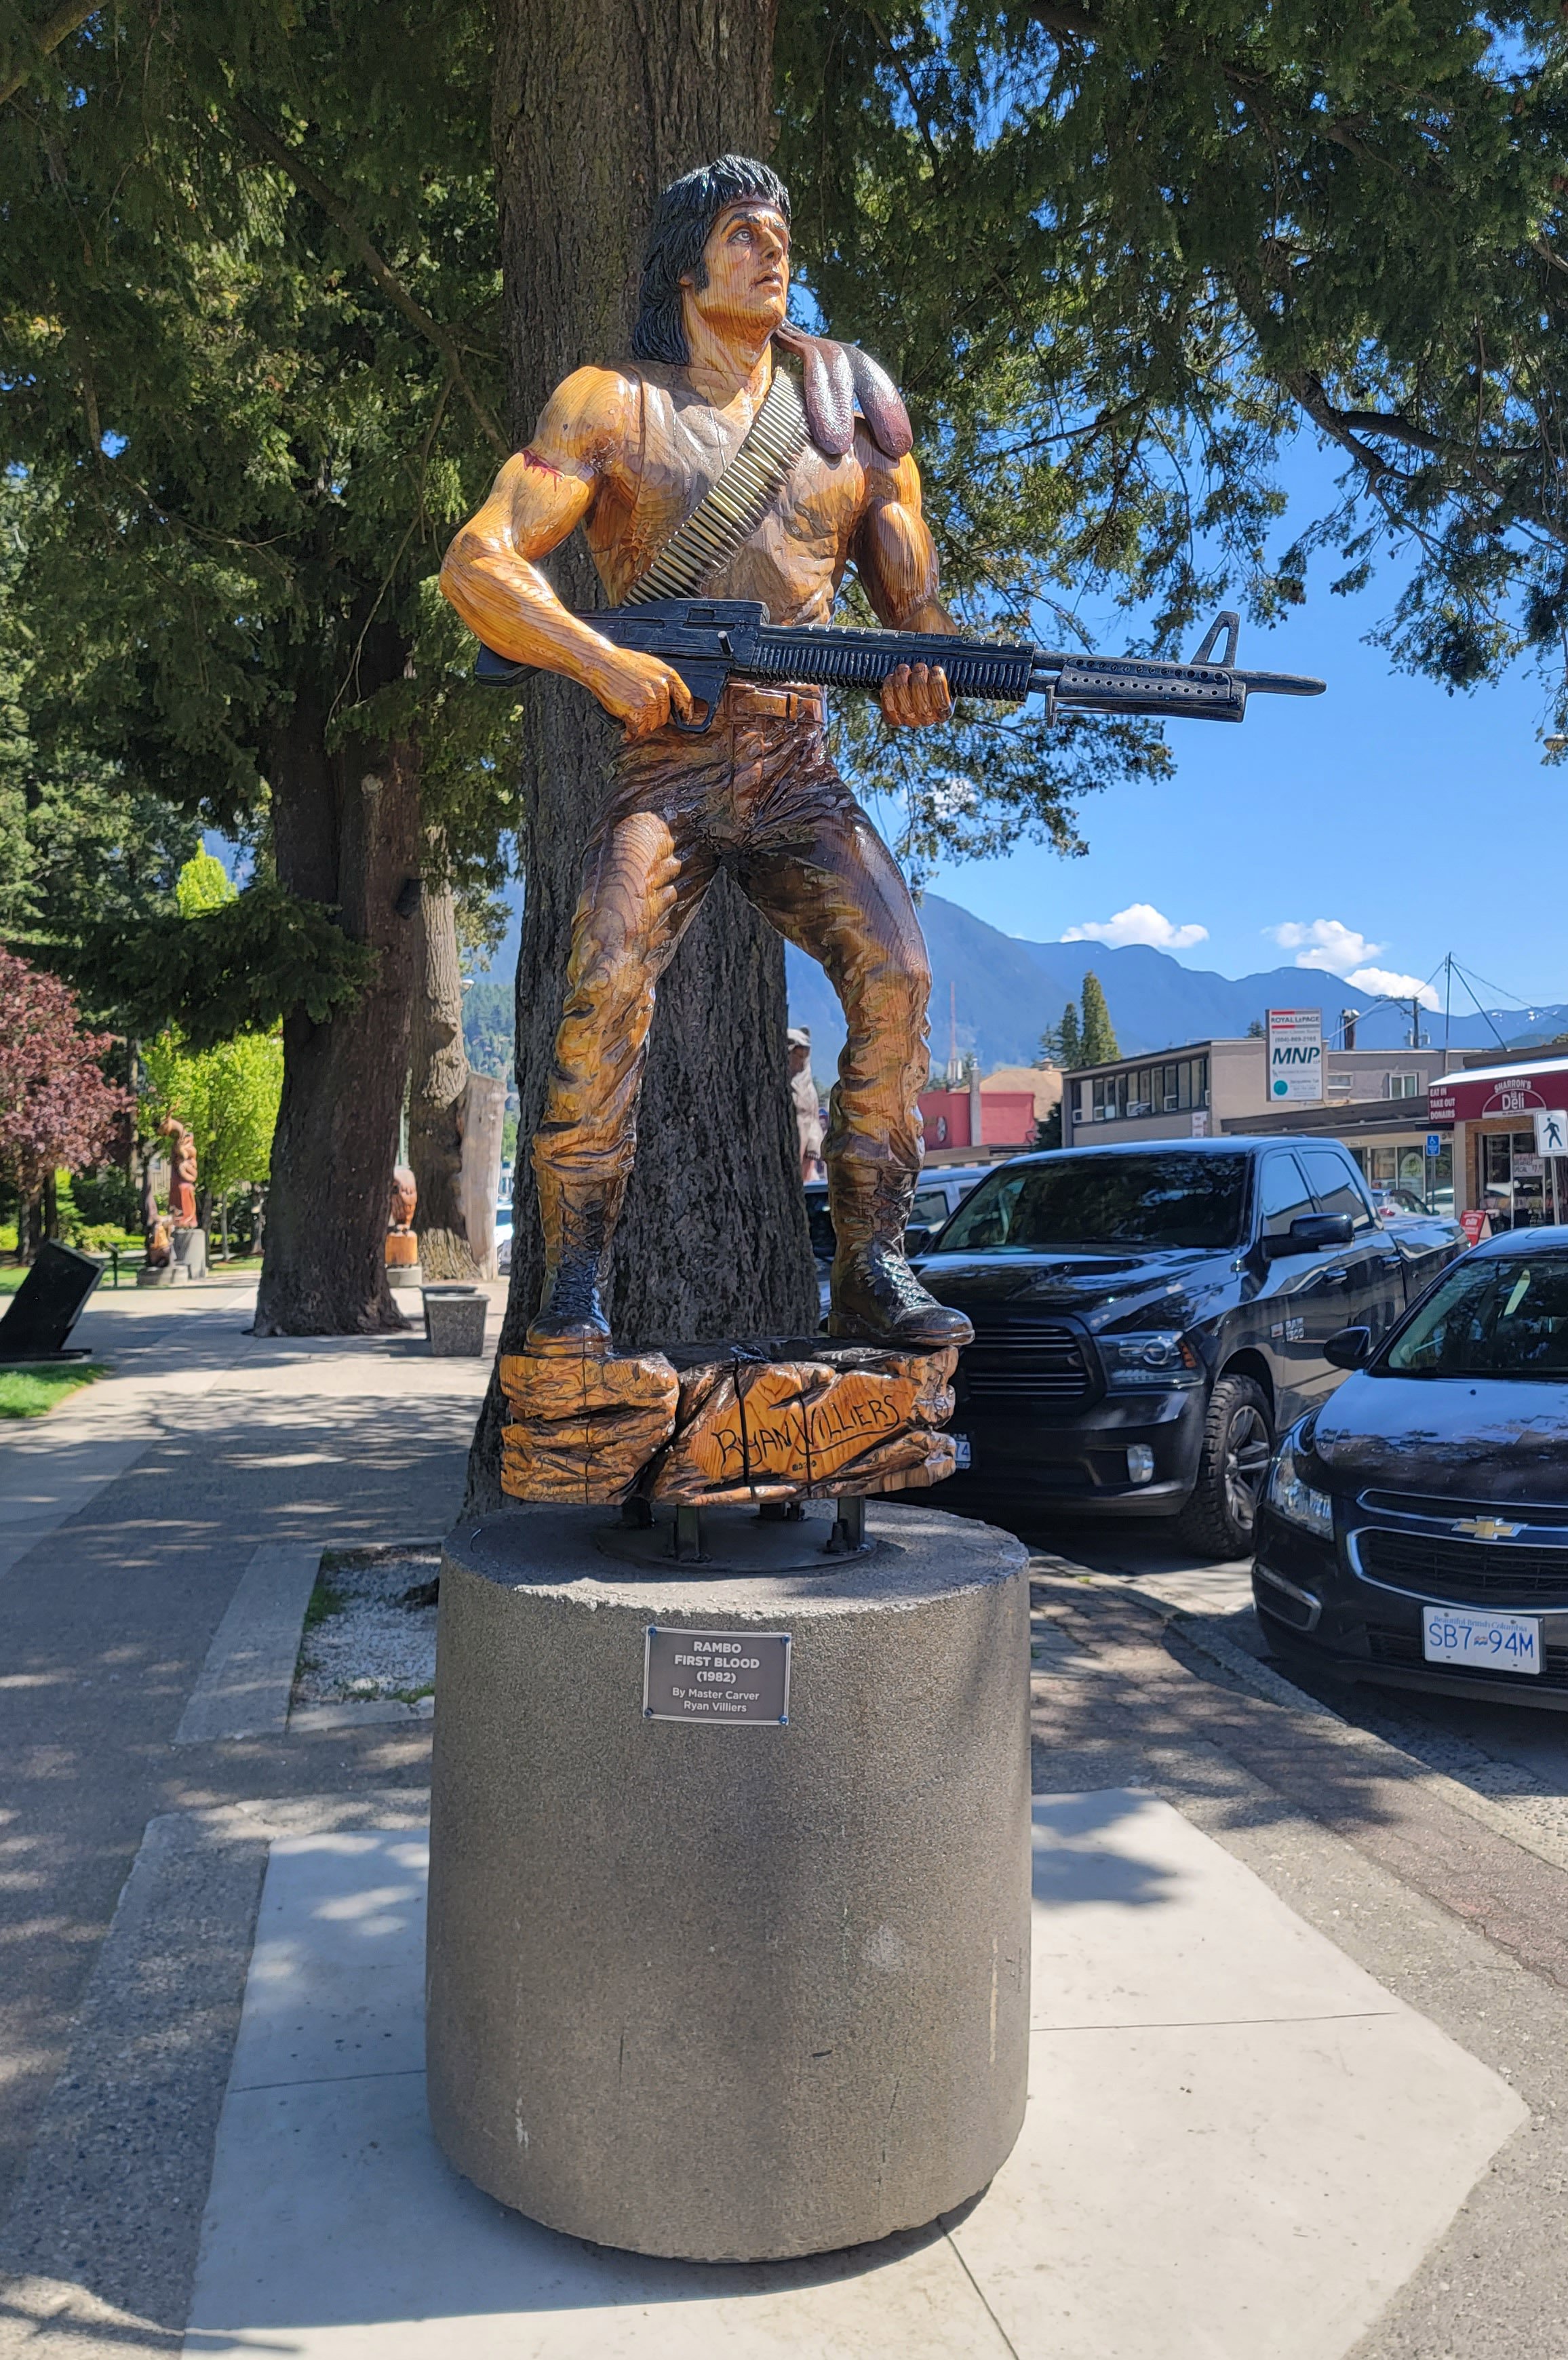 This is my reason for stopping: The Rambo. Also did you know this is the town where they shot the movie? 